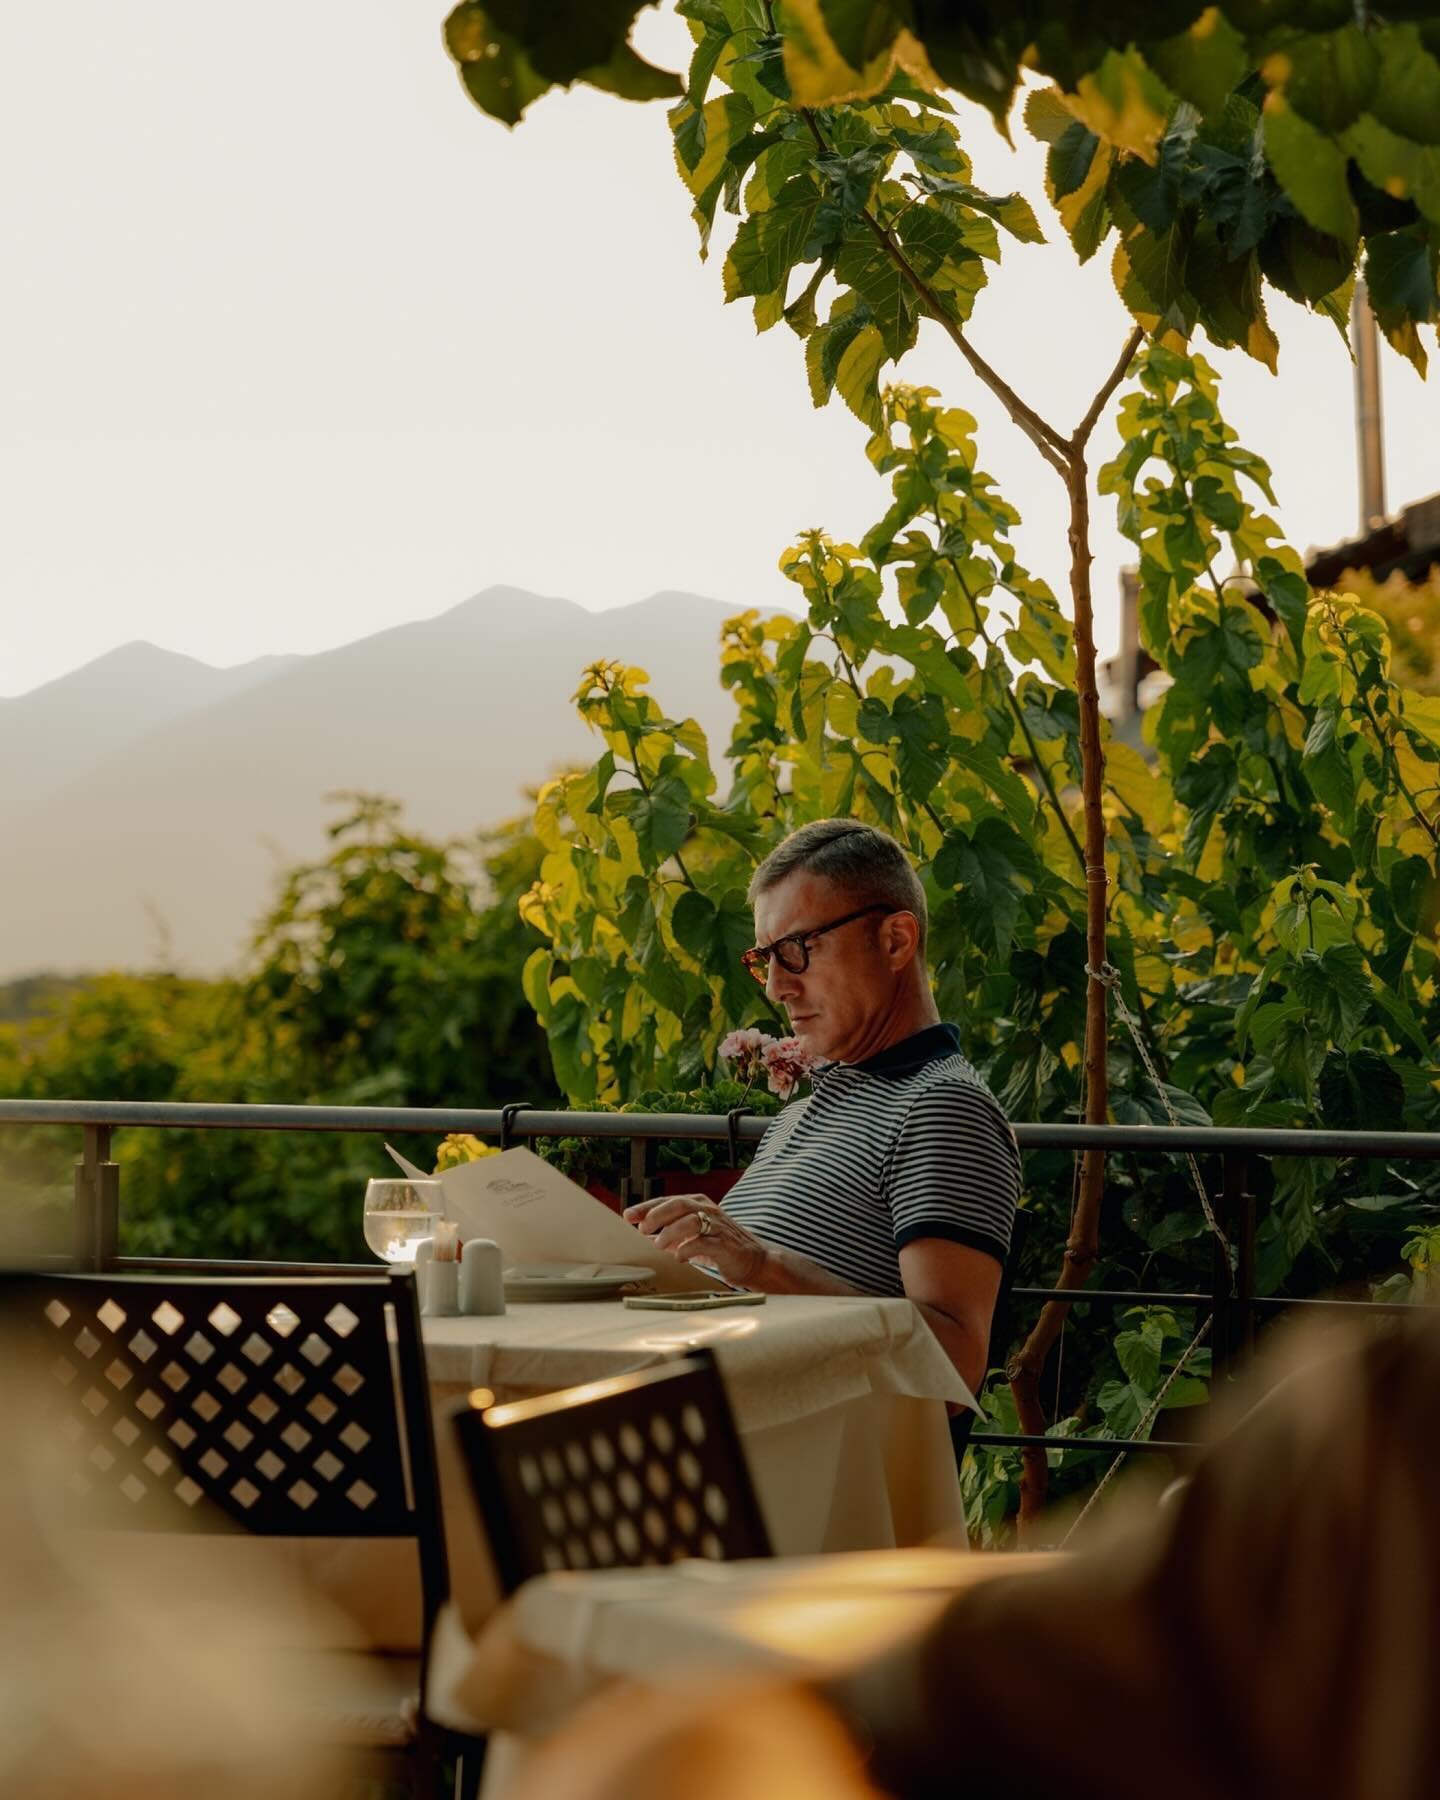 Perpetually working on my color grading technique and re-editing a couple of my favorite dining experiences in Greece. I could eat here again and again and it would never get old. The view is unparalleled! 😌🍷⛰️